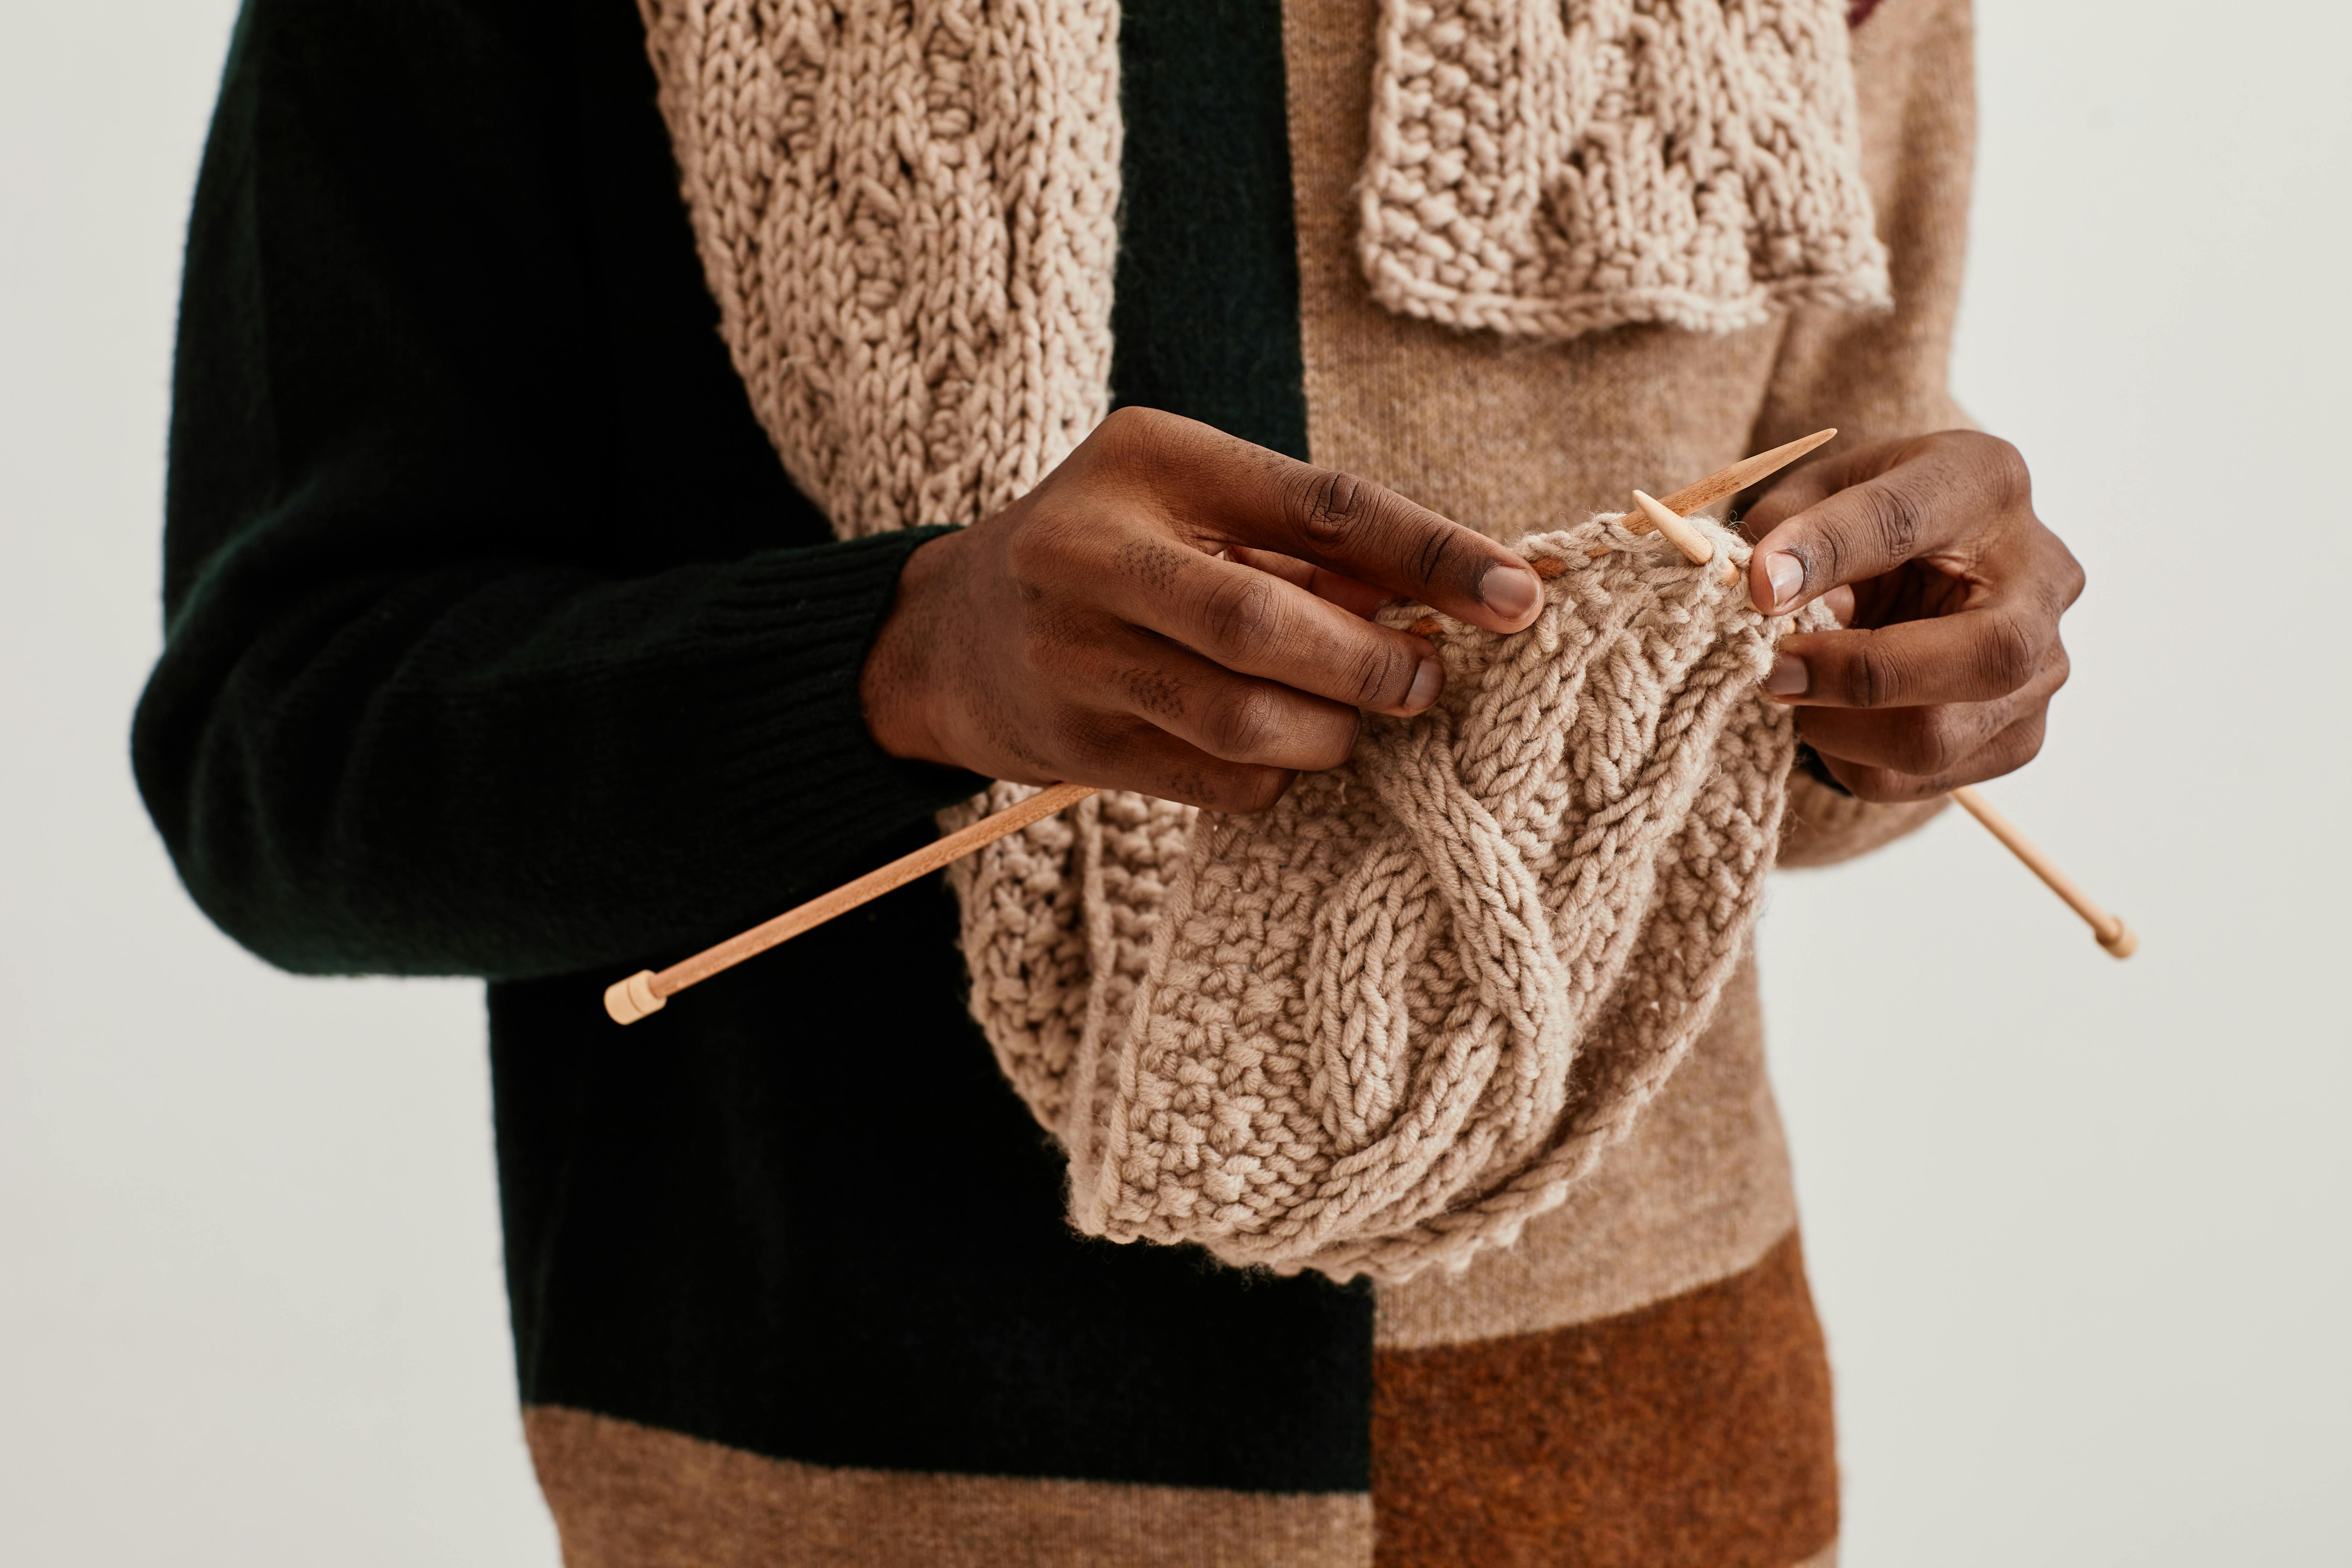  man knitting cable scarf while wearing it